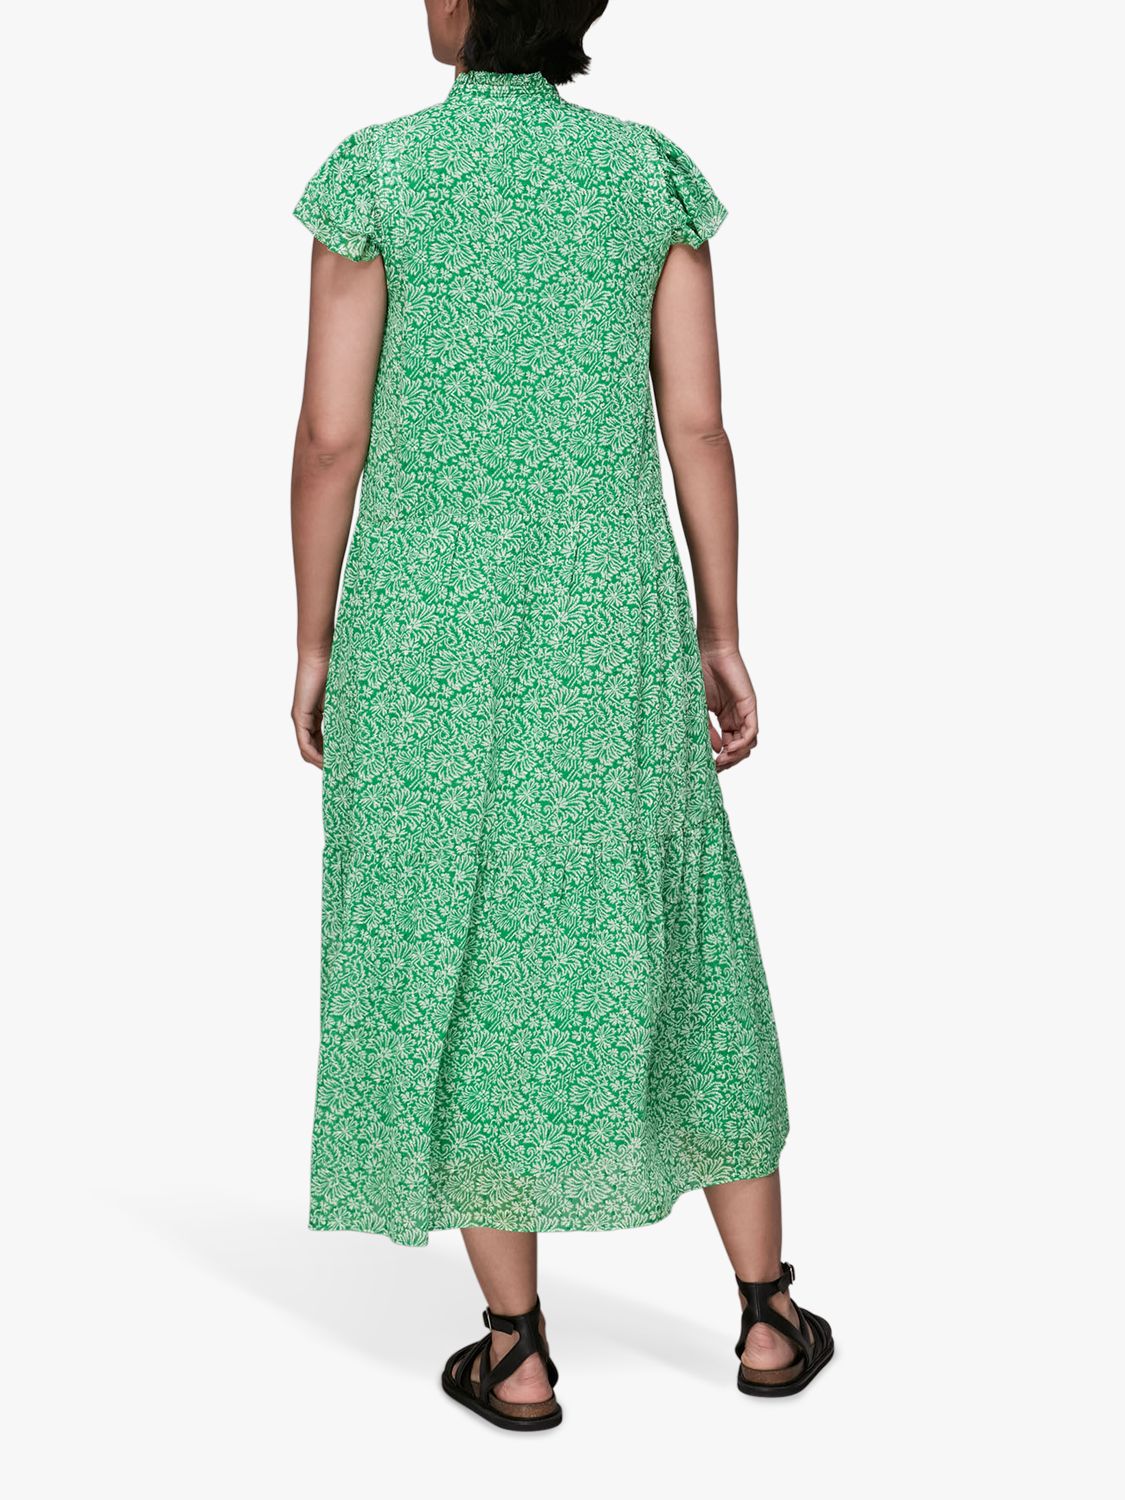 Whistles Indo Floral Print Tiered Dress, Green/Multi at John Lewis ...